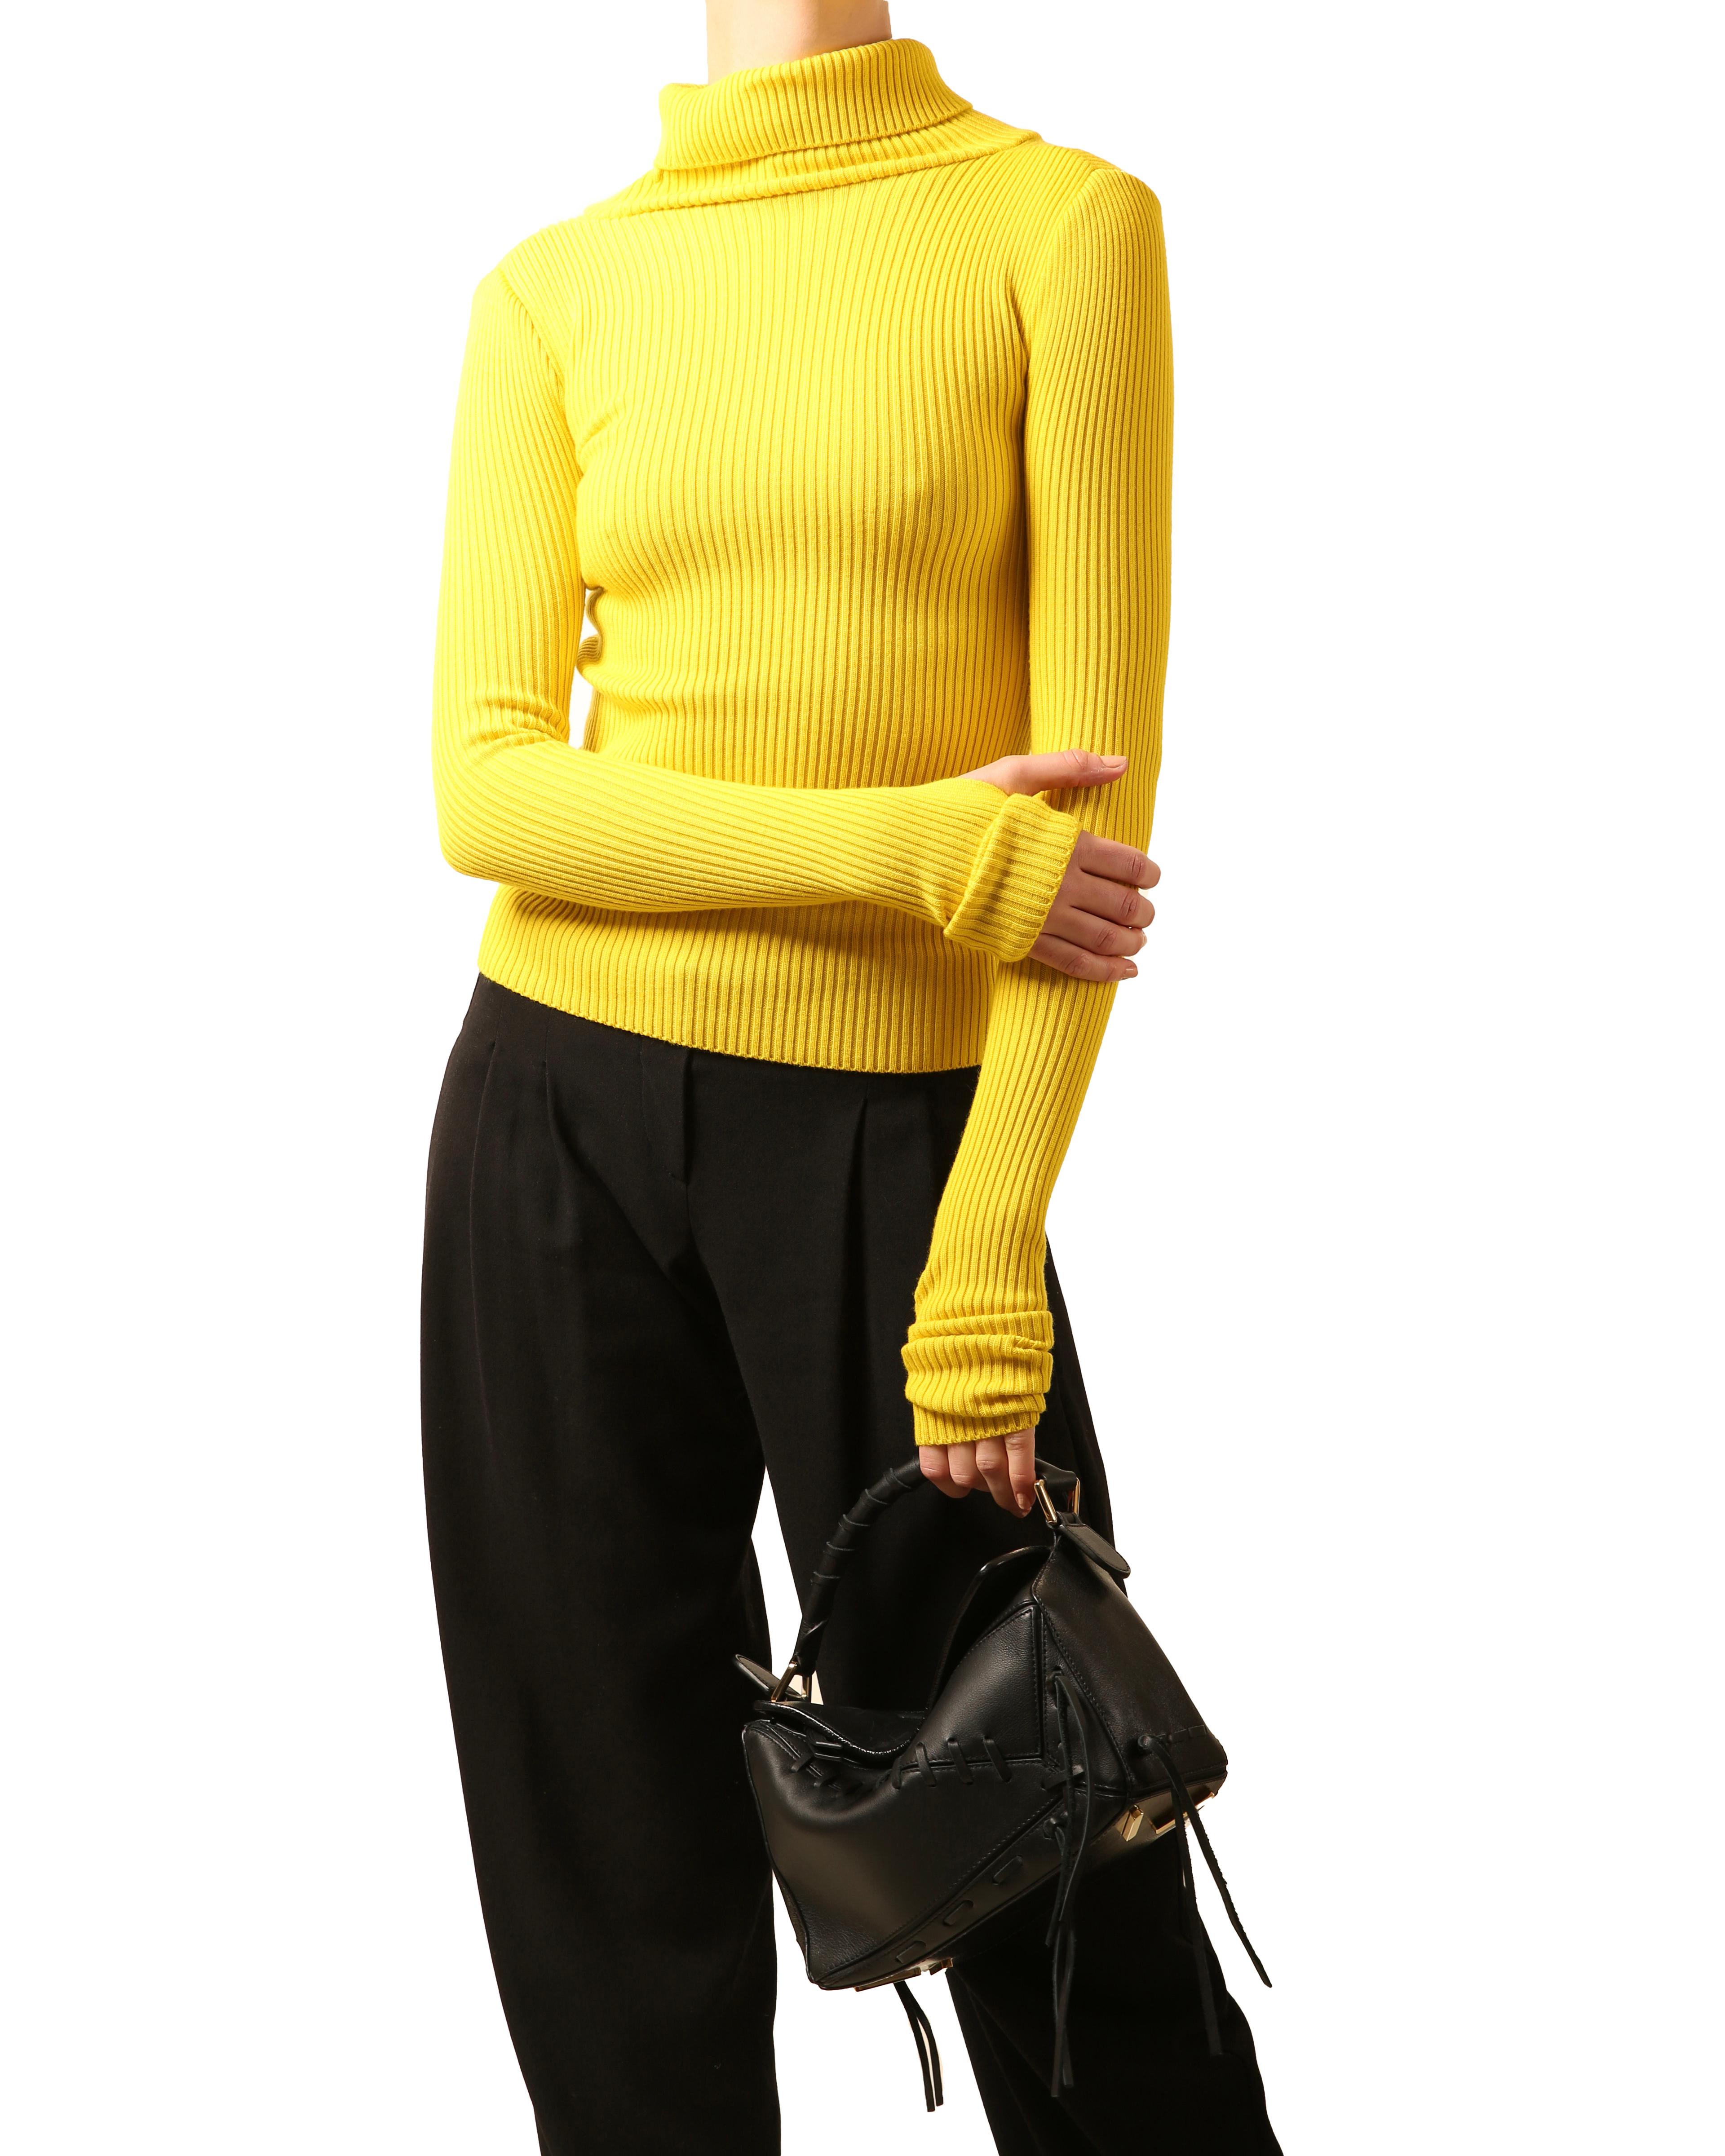 Jacquemus Fall 2016 skin tight bright yellow ribbed wide roll neck sweater
Slits to both arms 

Composition:
100% wool

Size:
FR 34

In excellent condition 

Measurements:
Shoulder 12